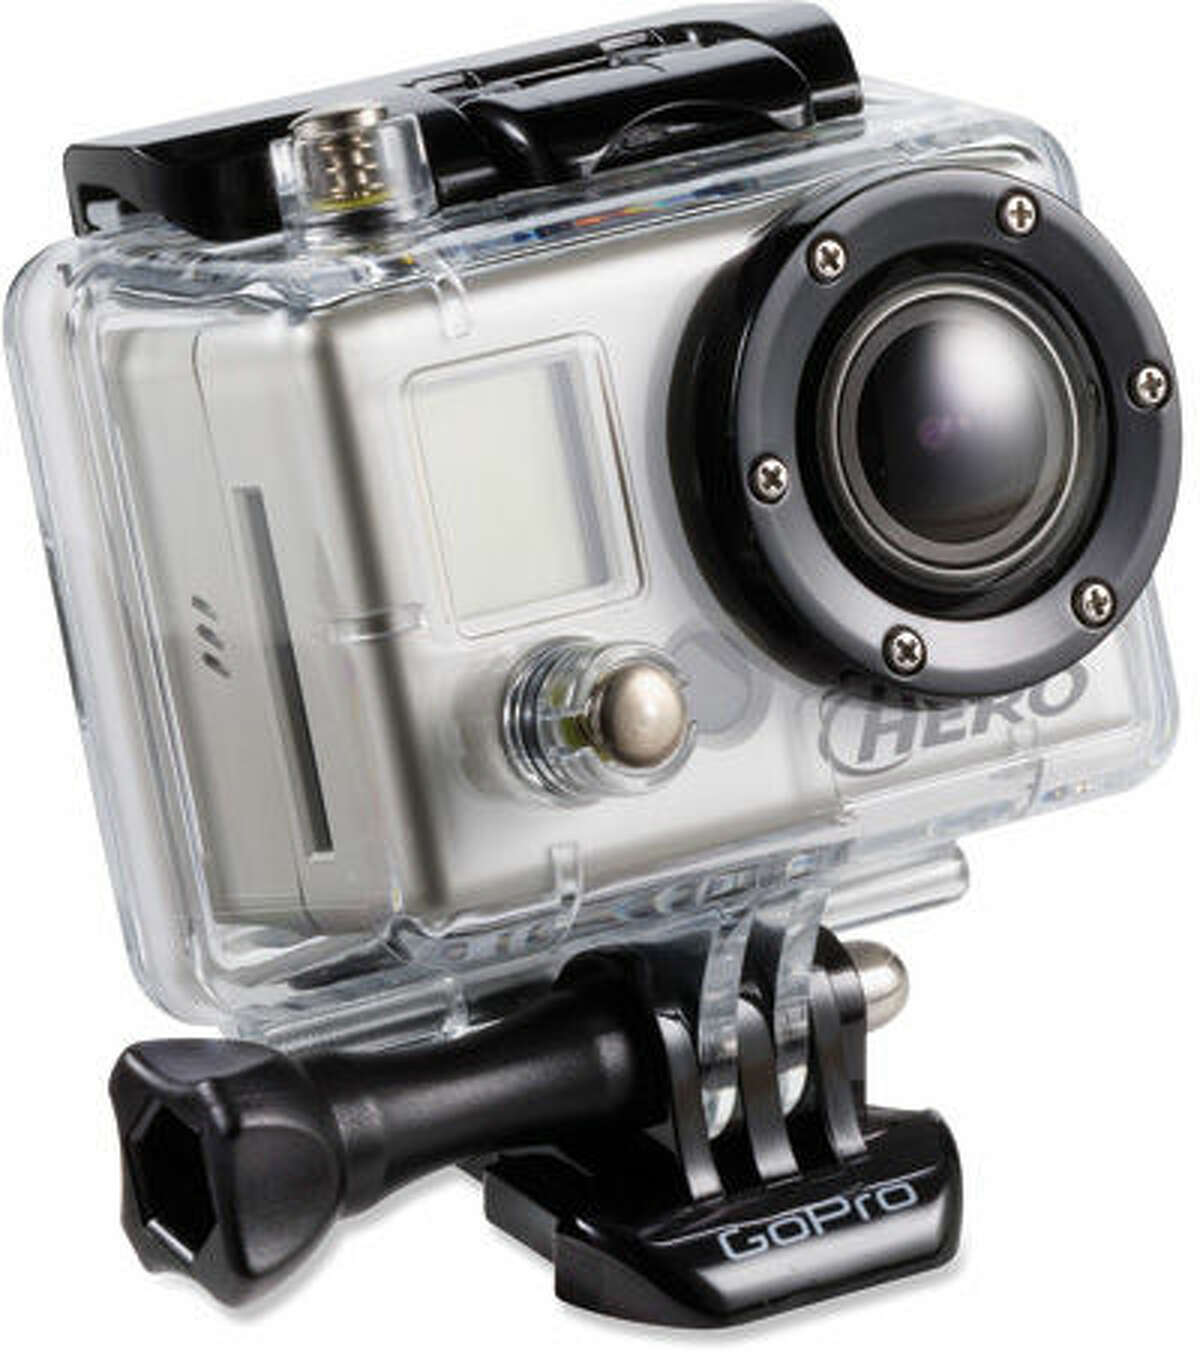 GoPro HD Hero Naked Wide Angle Helmet Camera$199.95, from REI, West Hartford, rei.com  